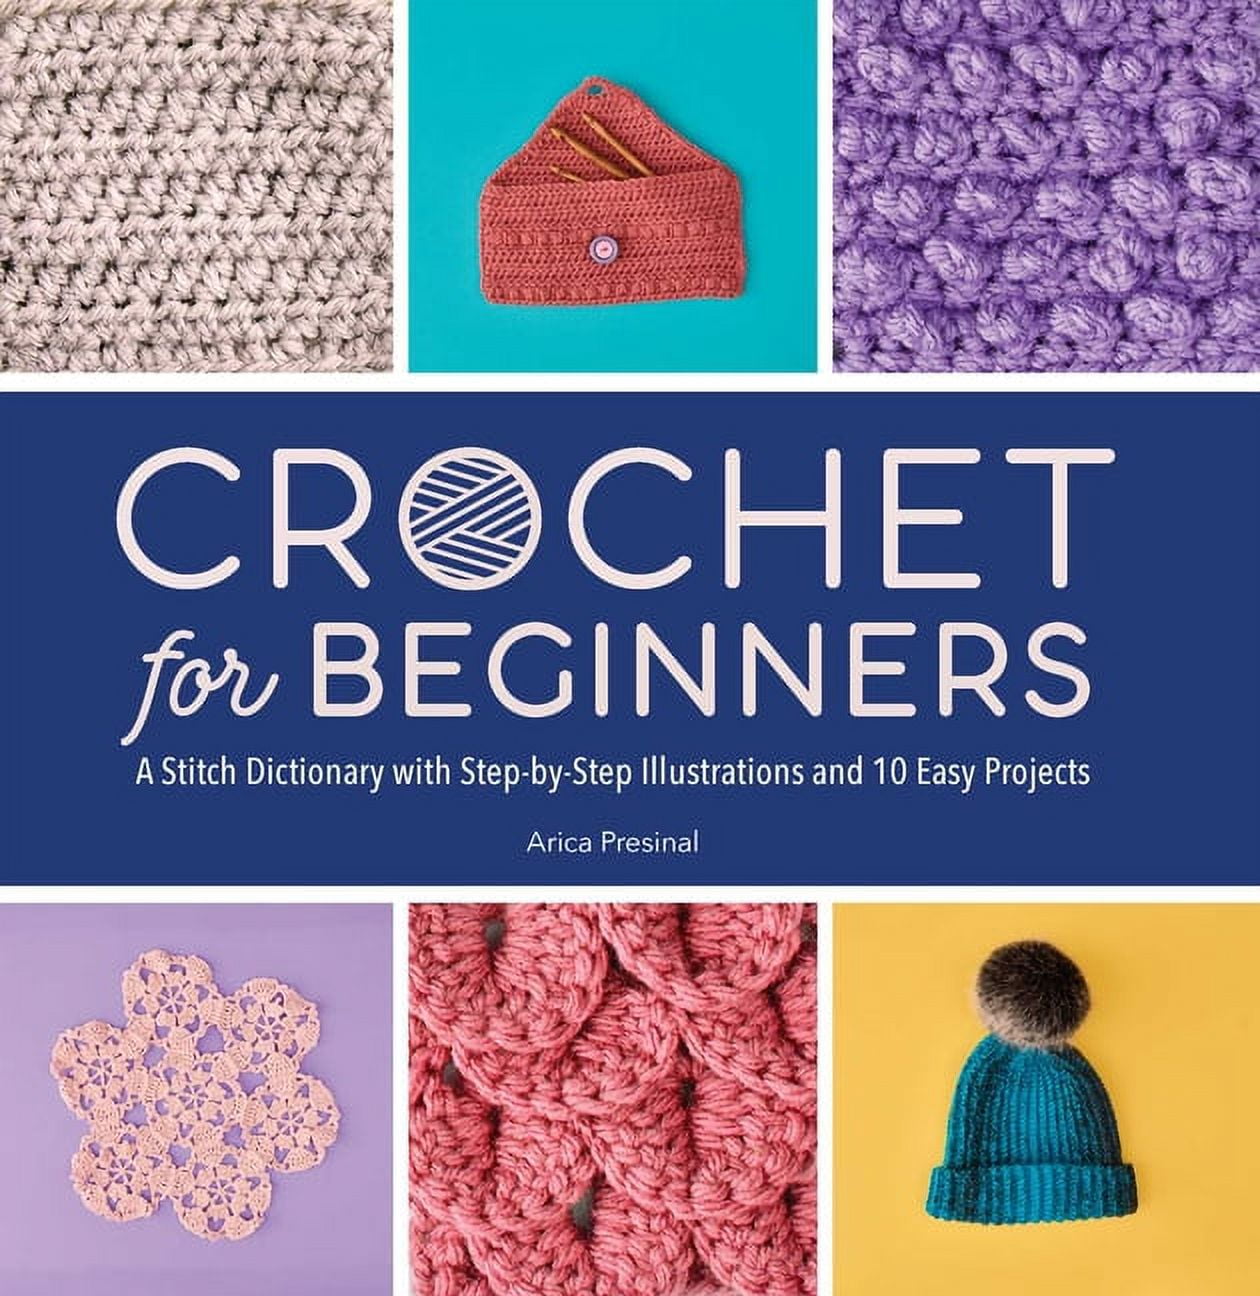 The Complete Guide on Learning How to Crochet from Beginner to Expert  (Large Print / Paperback)